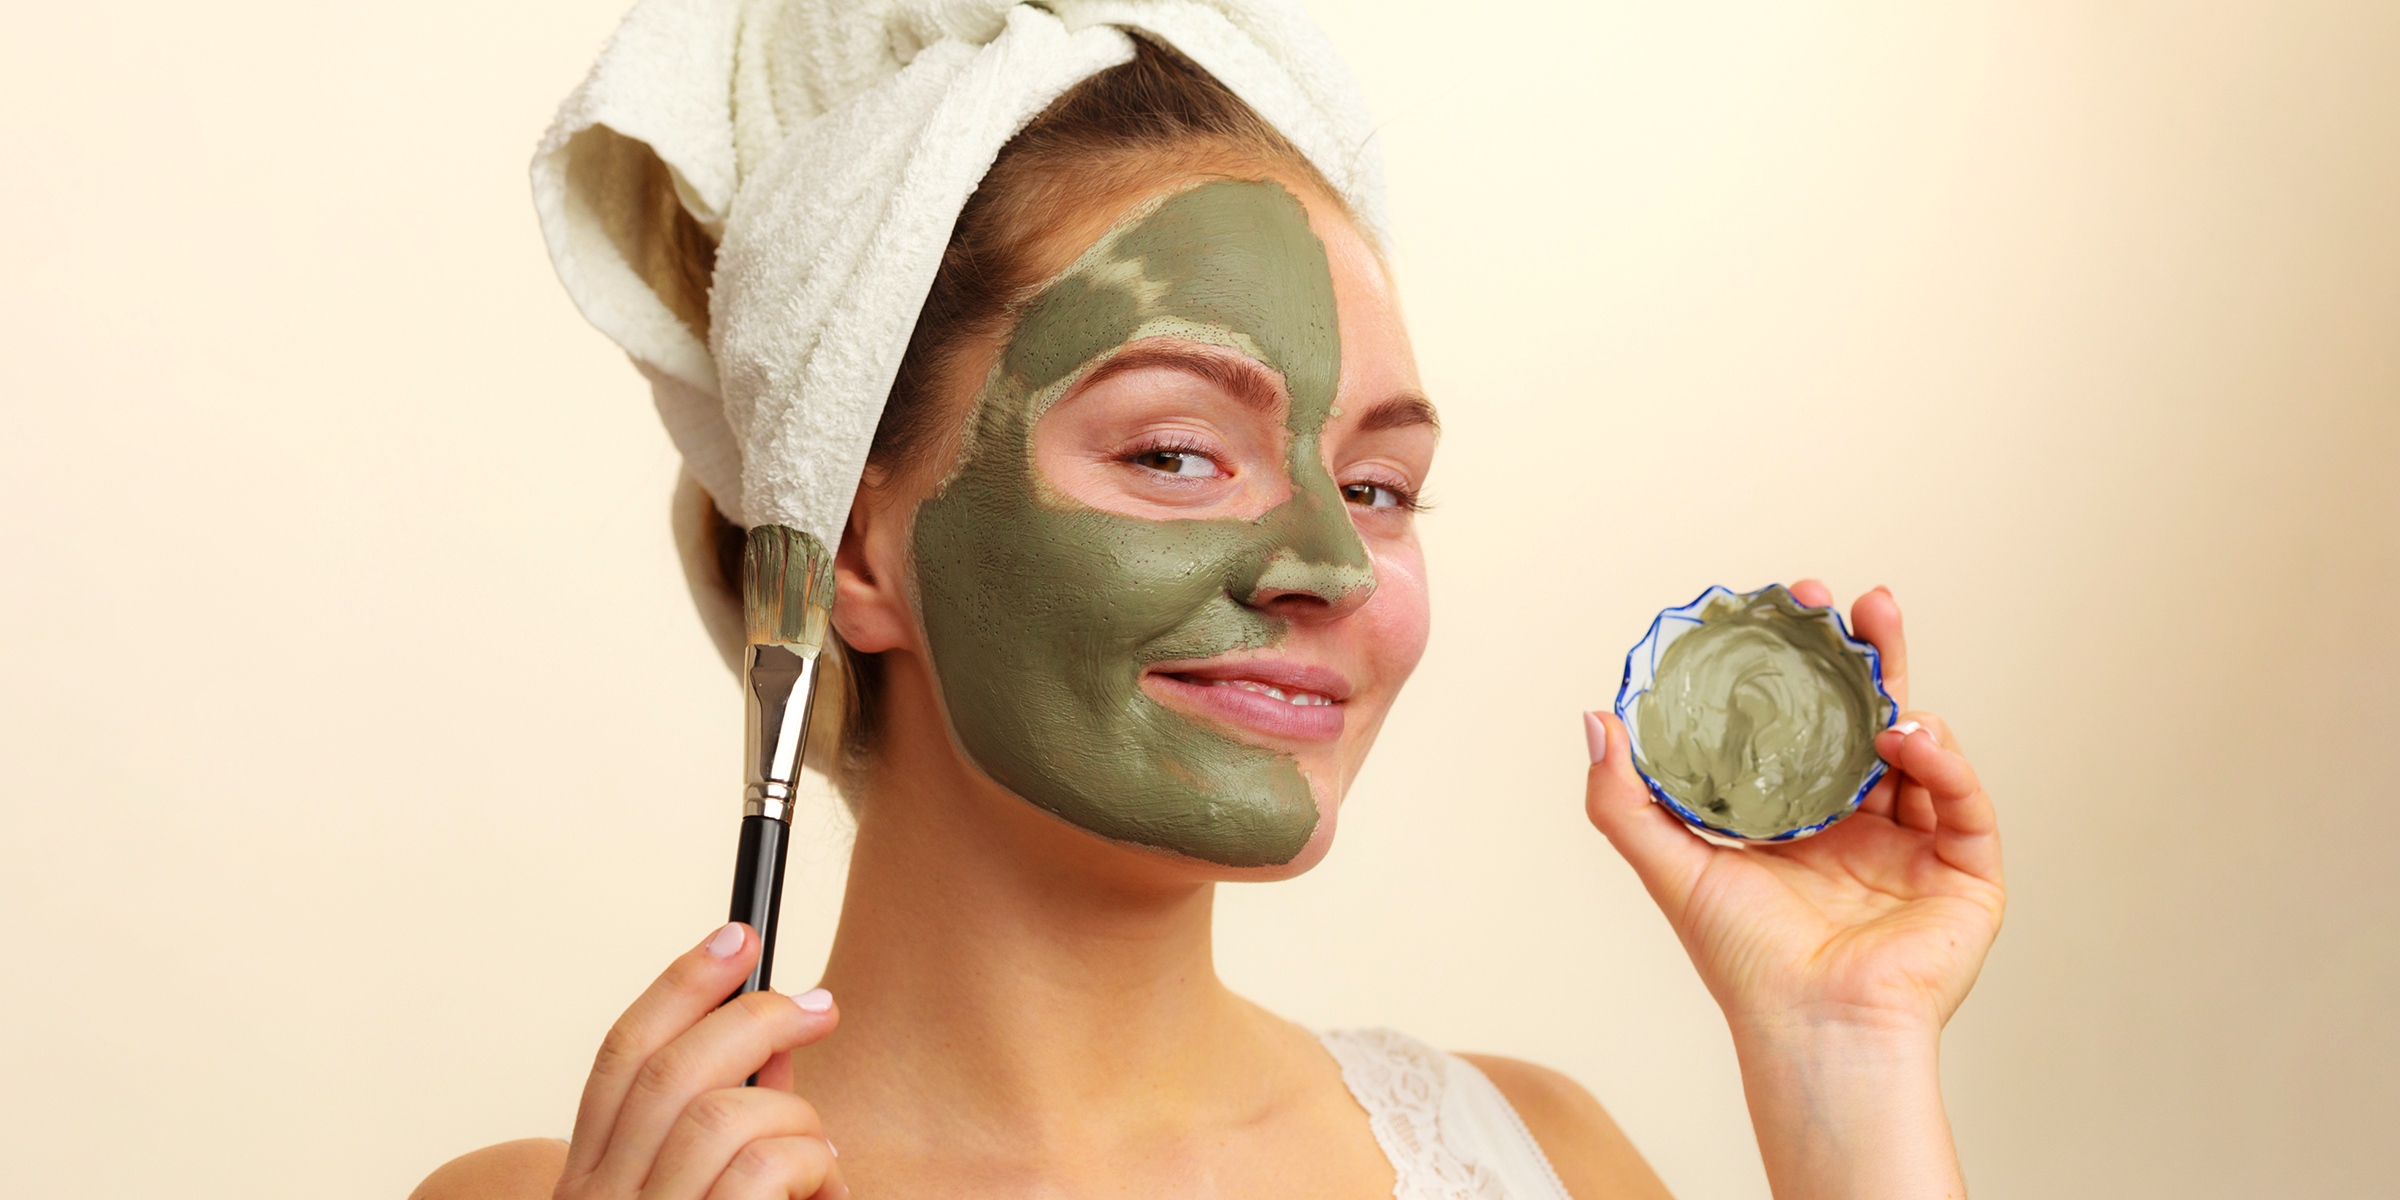 A woman engaging in her skincare routine | Source: Shutterstock